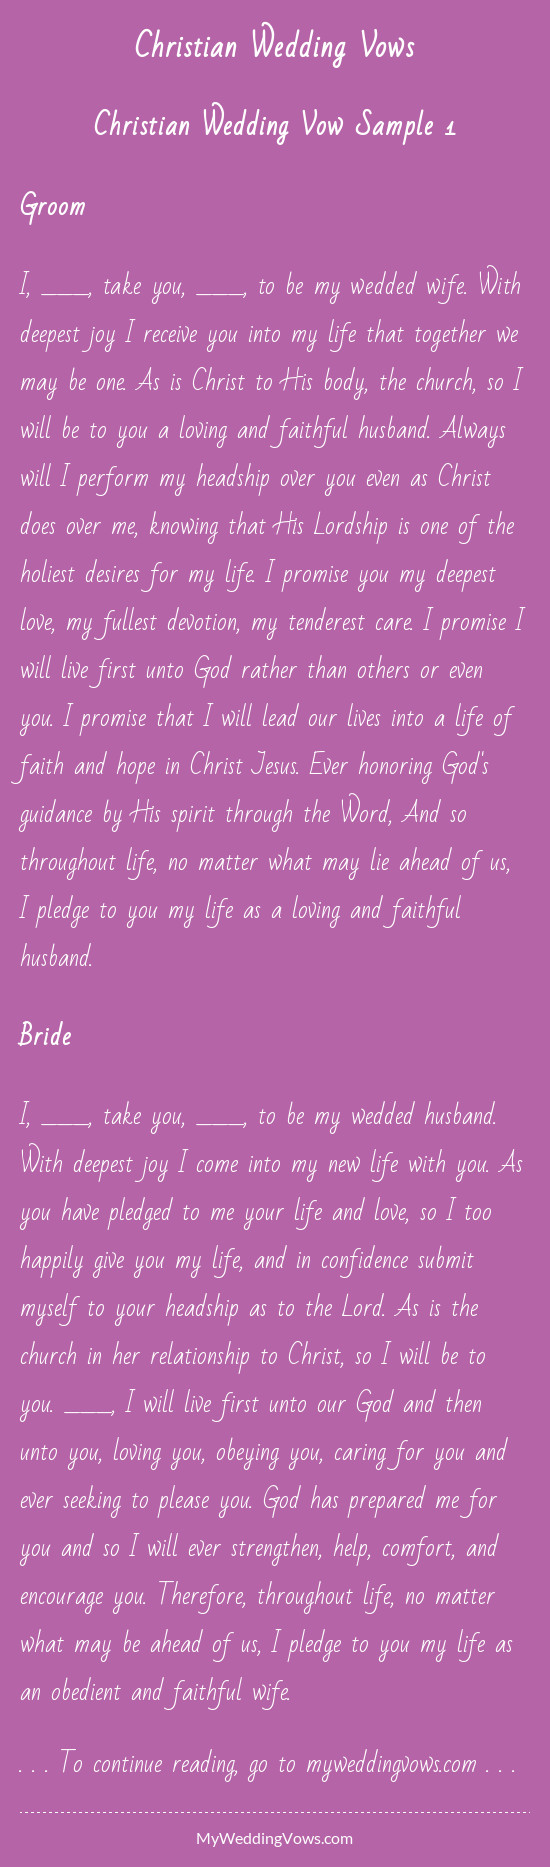 Book Of Common Prayer Wedding Vows
 Ideas Sophisticated Christian Wedding Vows For Great